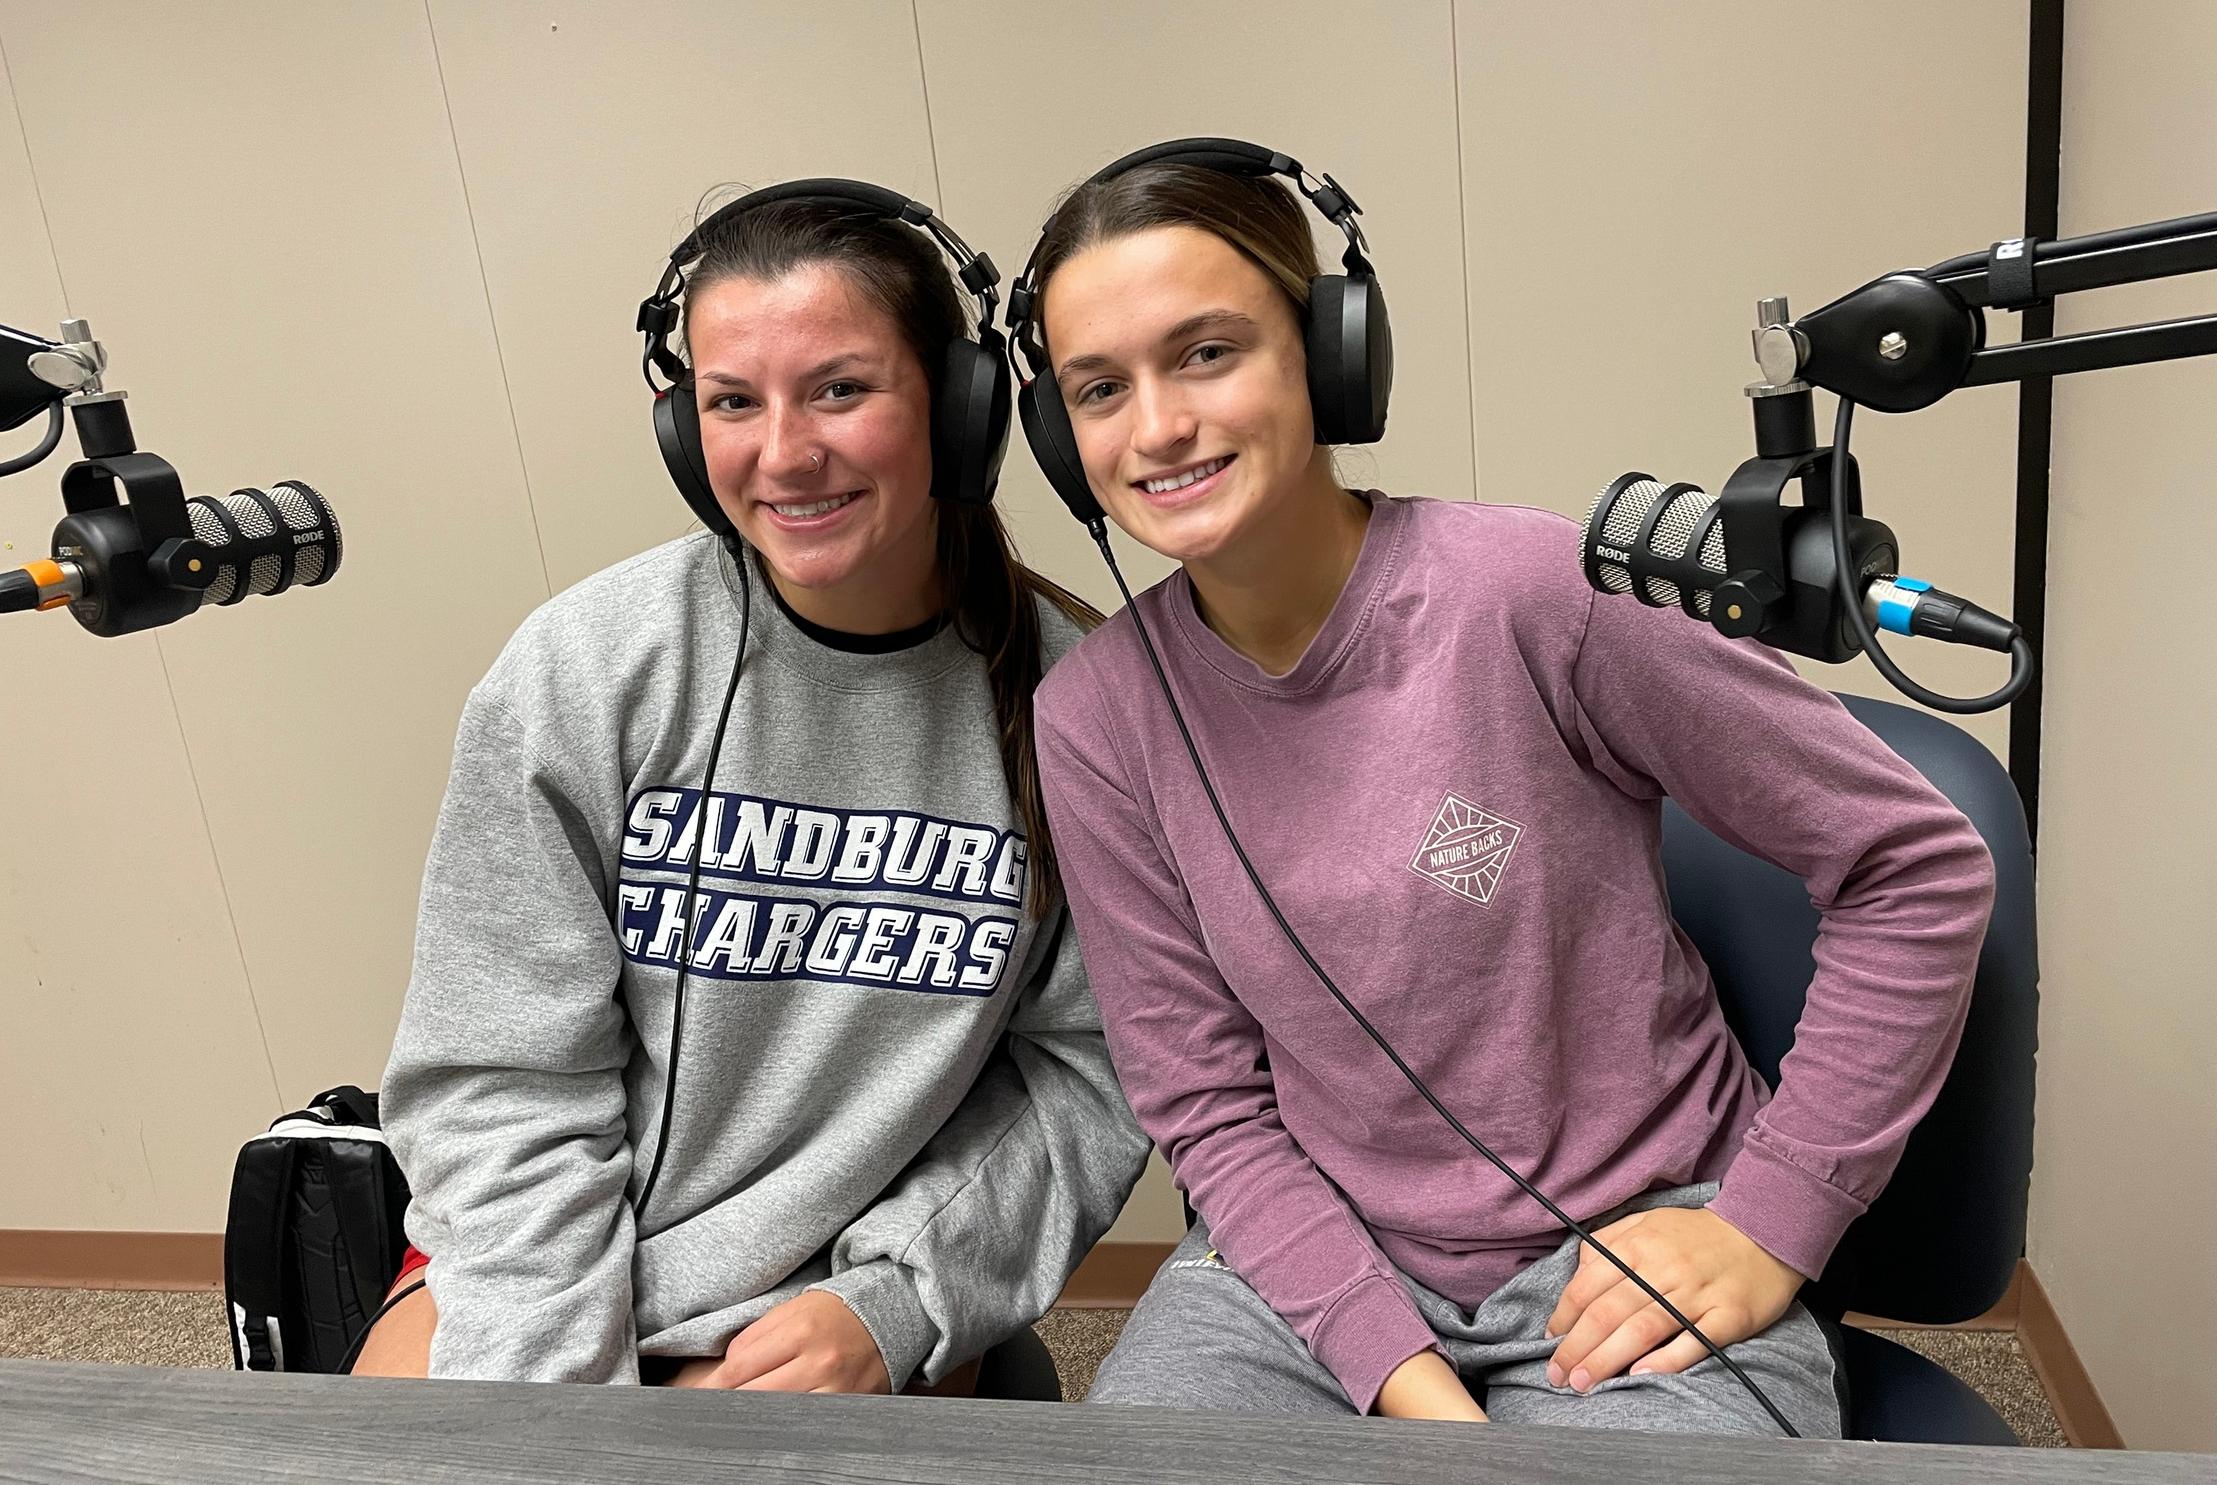 Chargers volleyball players Grace Evans (left) and AJ Rask (right) were the guests on Episode 16 of the Sandburg Athletics Podcast.